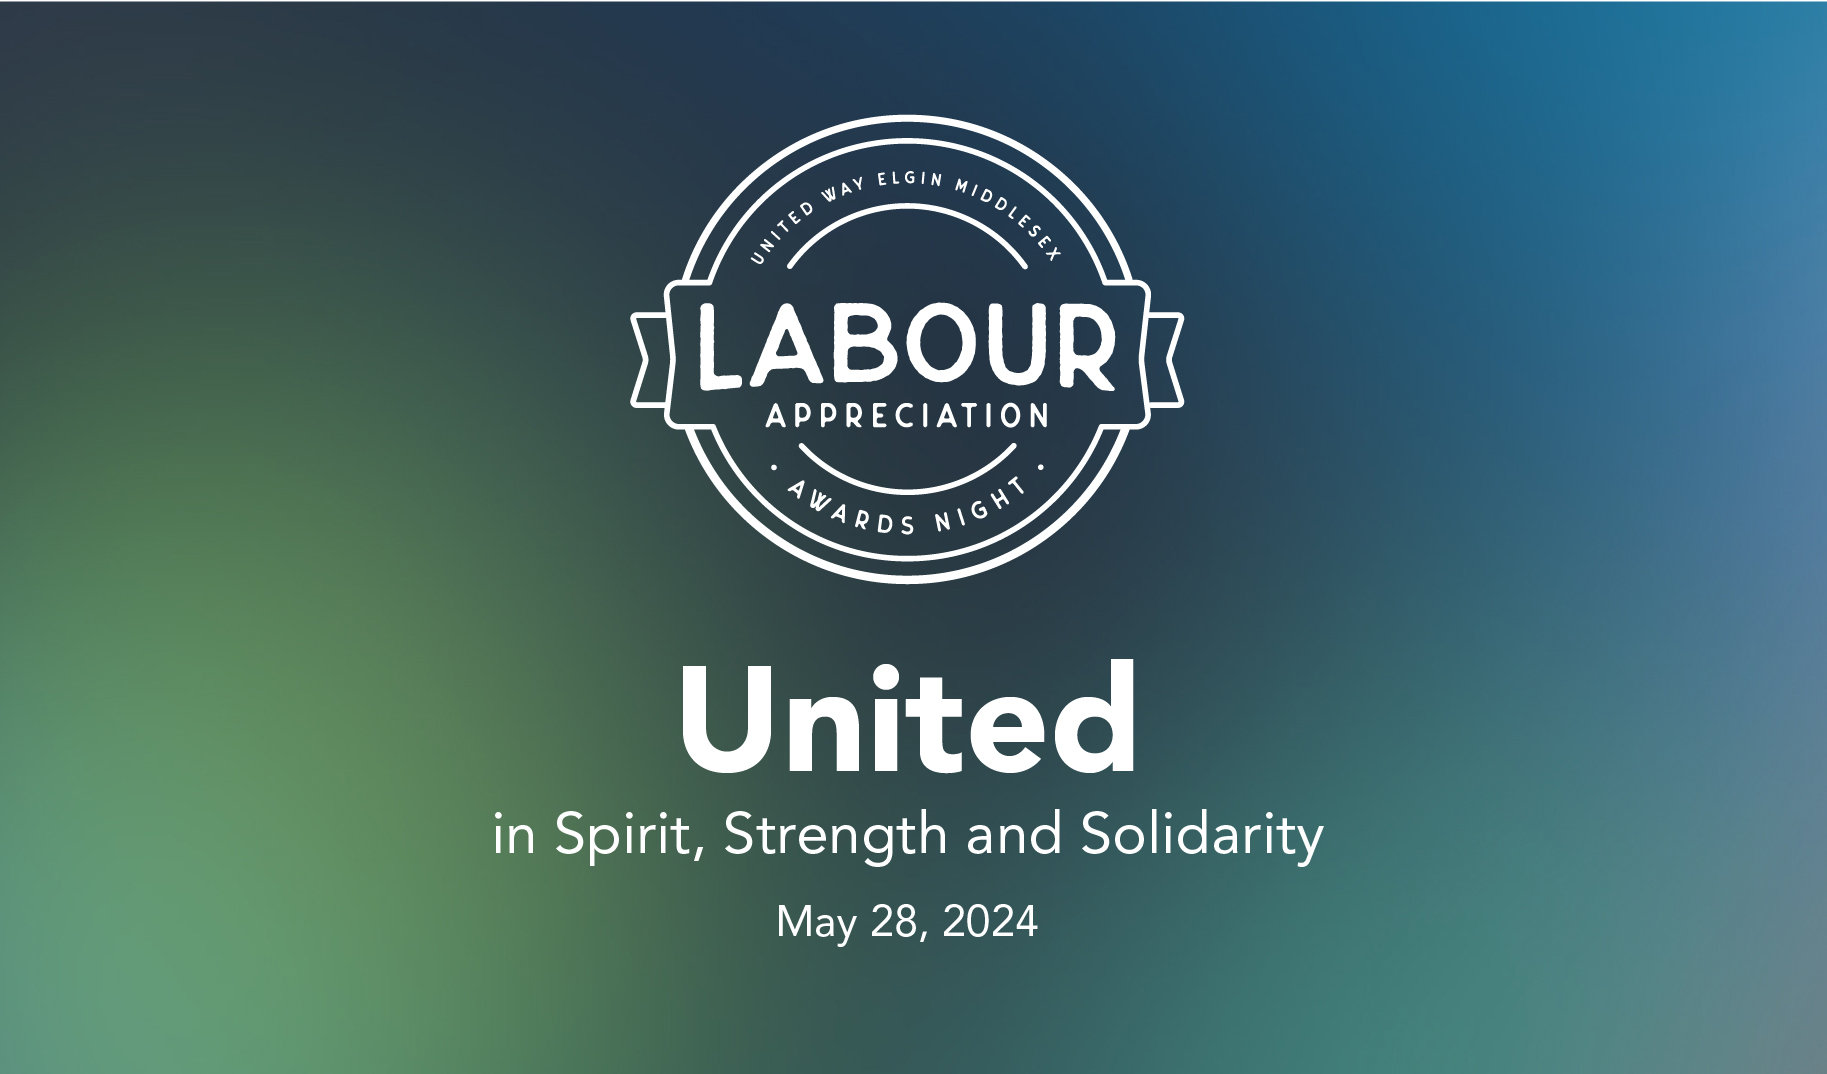 United in Spirit, Strength & Solidarity. Labour Appreciation Awards Night, May 28, 2024.